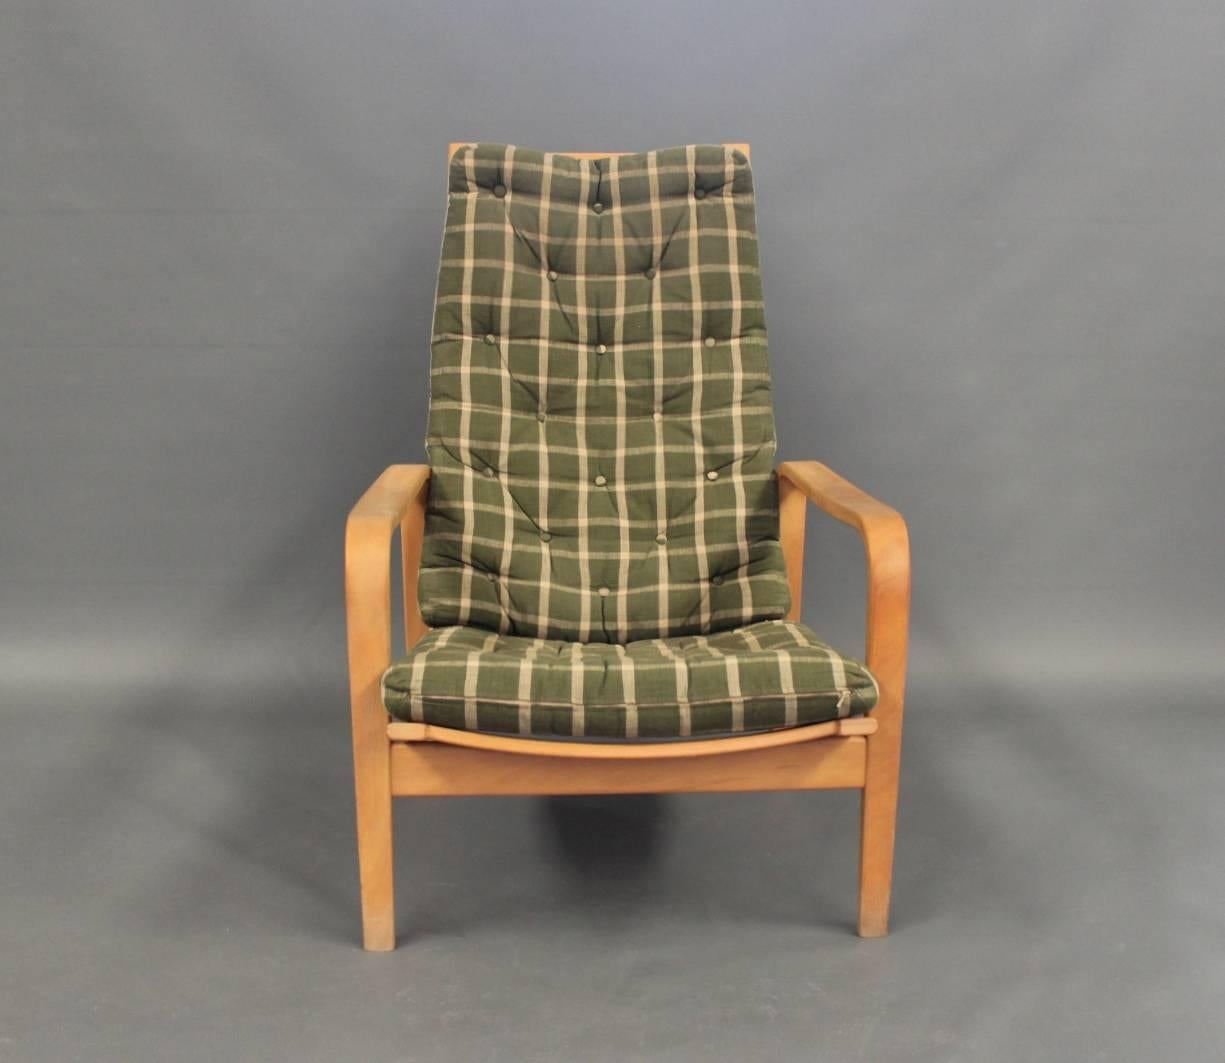 A pair of easy chairs with stool designed by Alf Svensson and manufactured by Källemo. The chairs are of beech and with green cushions. 
Measurements of stool:
H - 32 cm, W - 63 cm and D - 48 cm.

This product will be inspected thoroughly at our